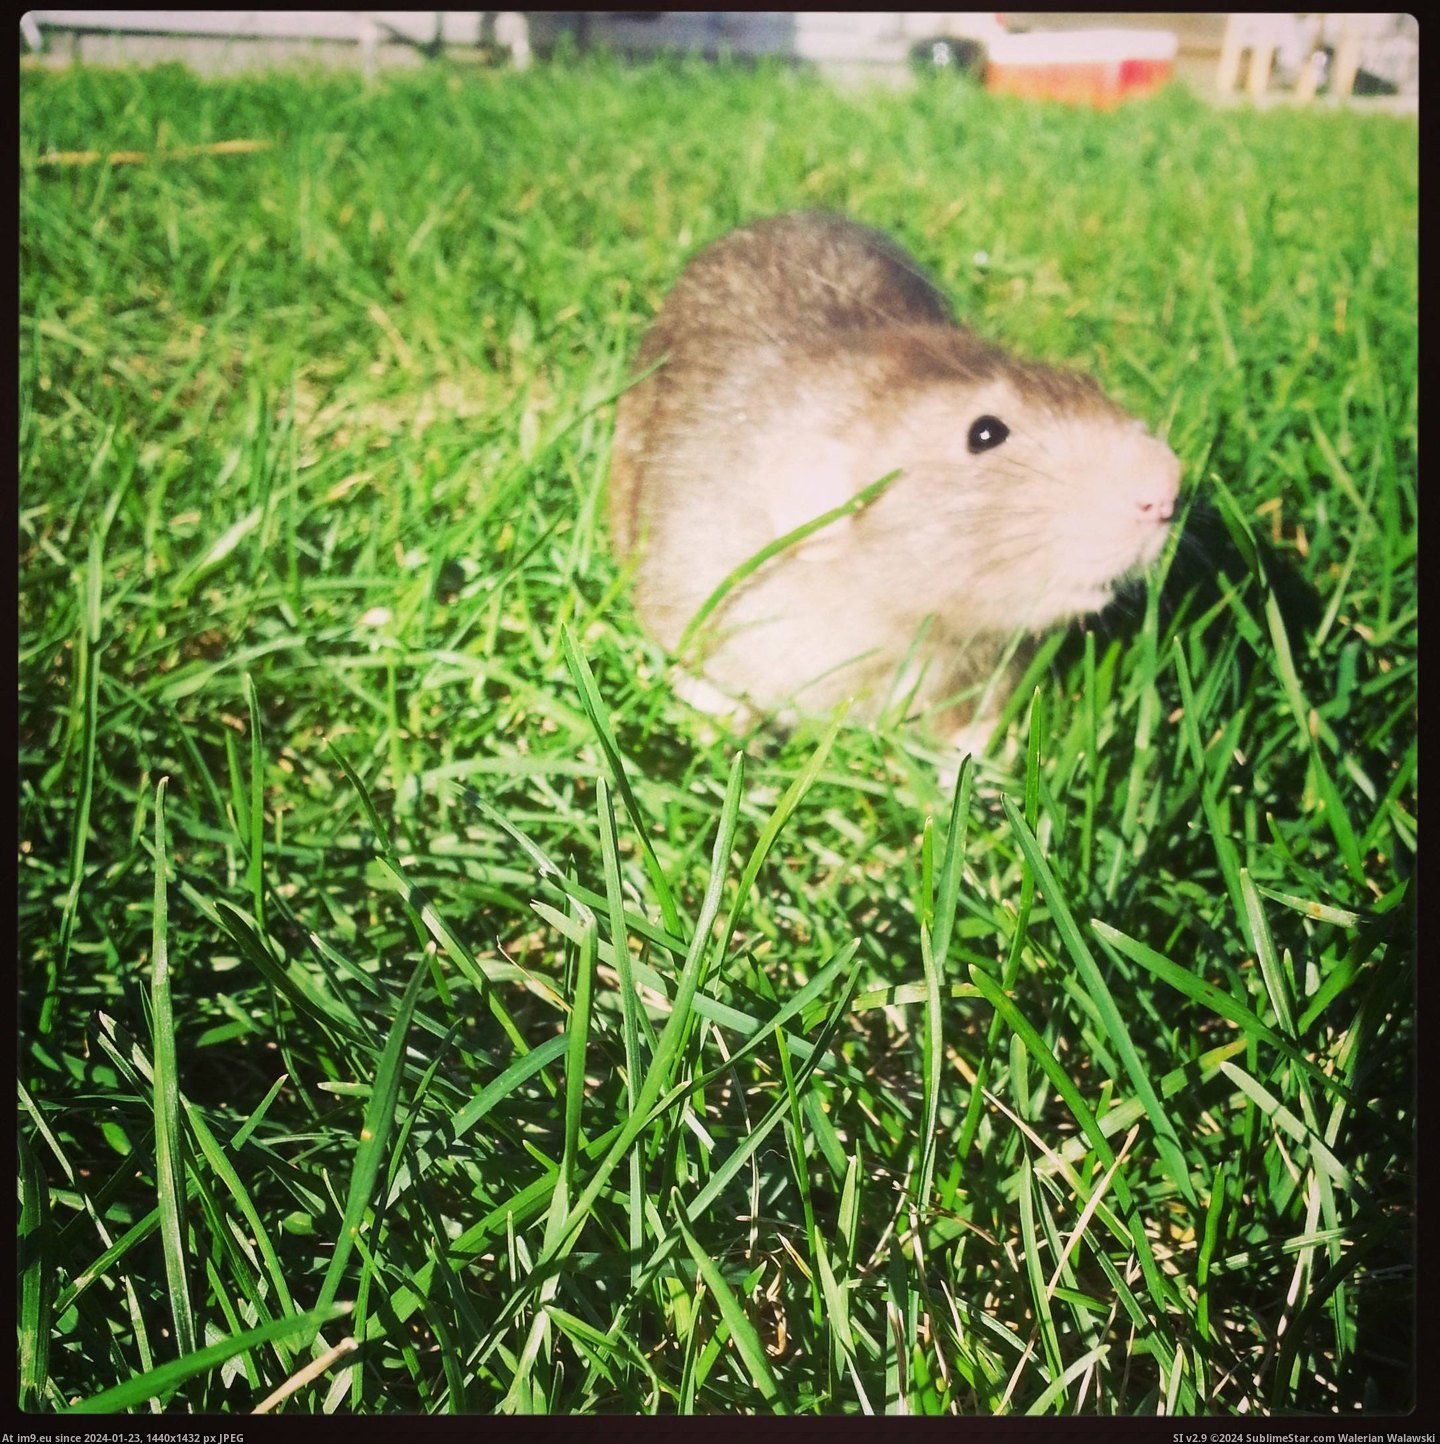 #Not #But #Grass #Traditional #Ratatouille #Loves #Buddy [Aww] Not traditional aww, but my buddy Ratatouille loves the grass. Pic. (Bild von album My r/AWW favs))